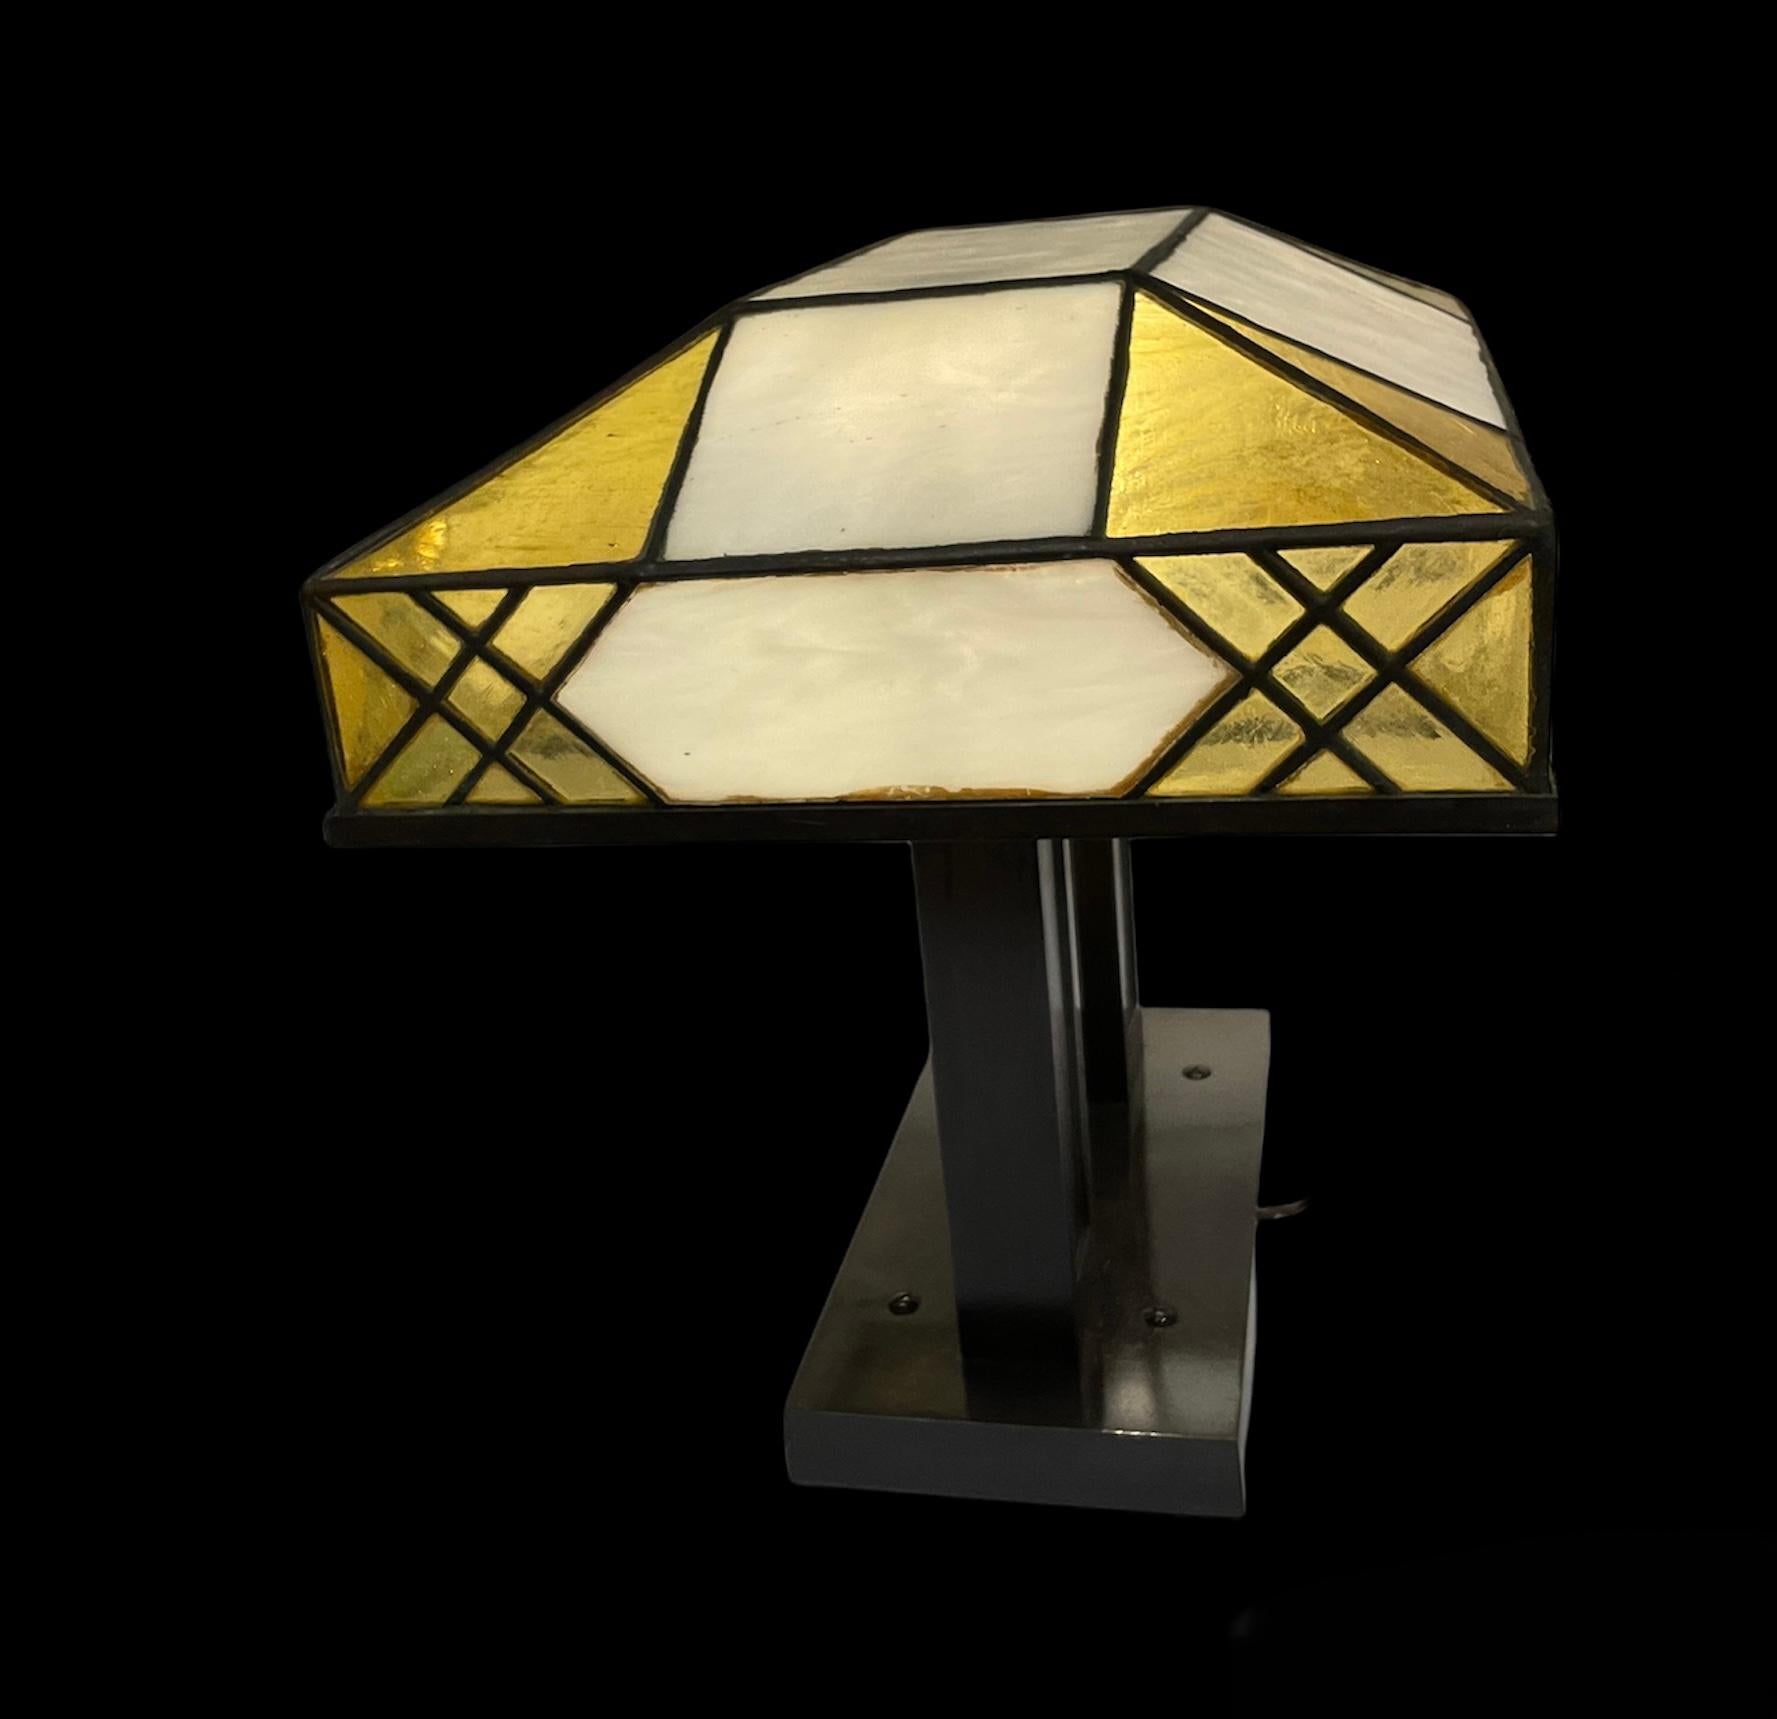 Hand-Crafted Tiffany Style Art Deco Stained Glass Rectangular Desk/Table Lamp